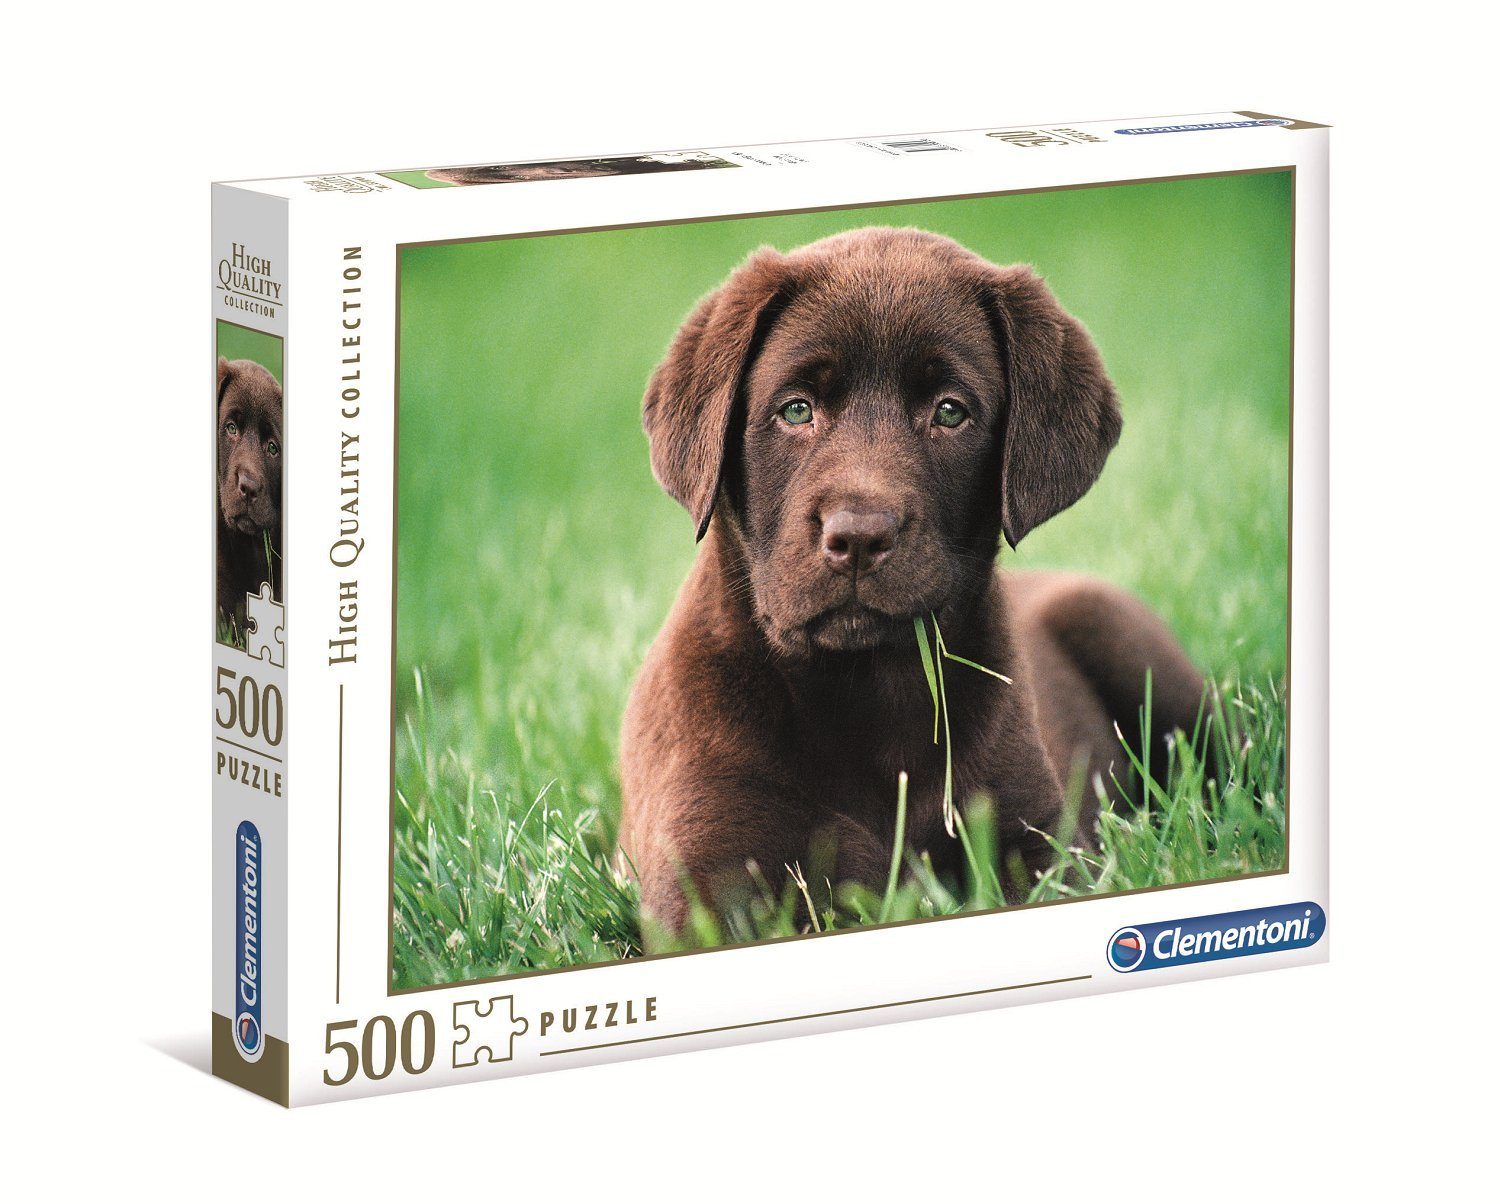 Puzzleteile 500 Teile, Puzzle Collection Puppy Quality High Chocolate Clementoni®